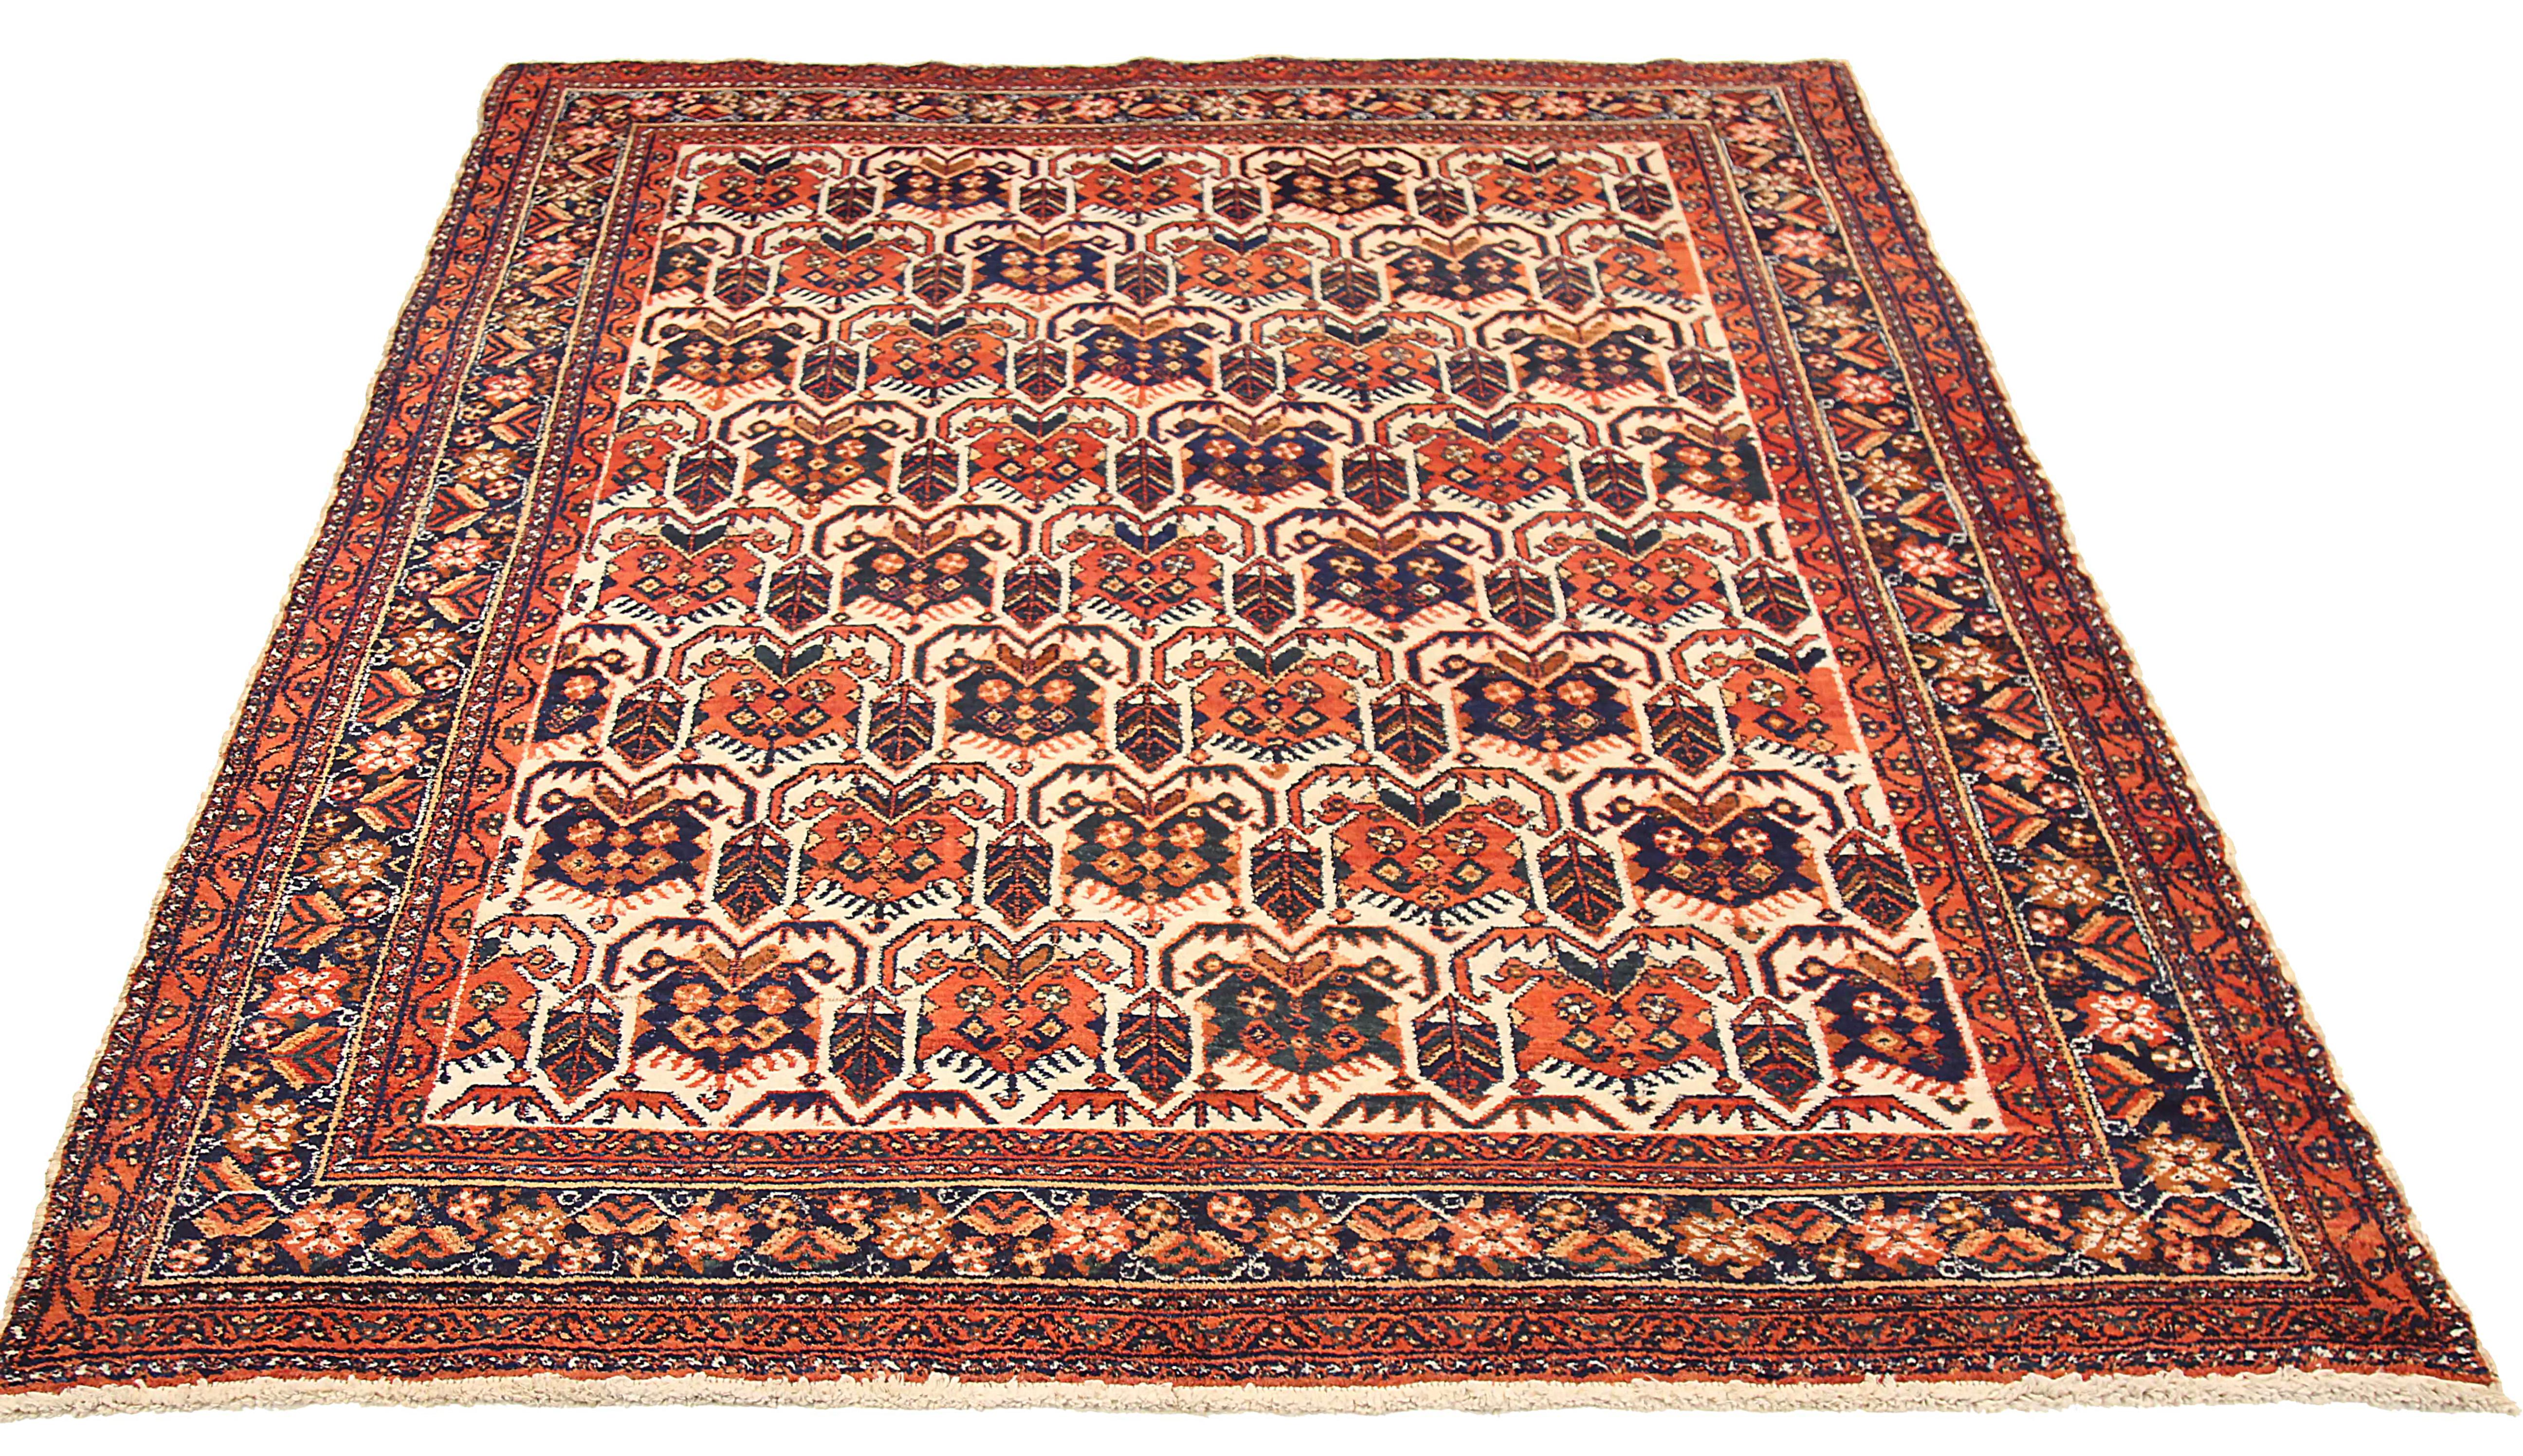 Antique Persian area rug handwoven from the finest sheep’s wool. It’s colored with all-natural vegetable dyes that are safe for humans and pets. It’s a traditional Isfahan design handwoven by expert artisans. It’s a lovely area rug that can be